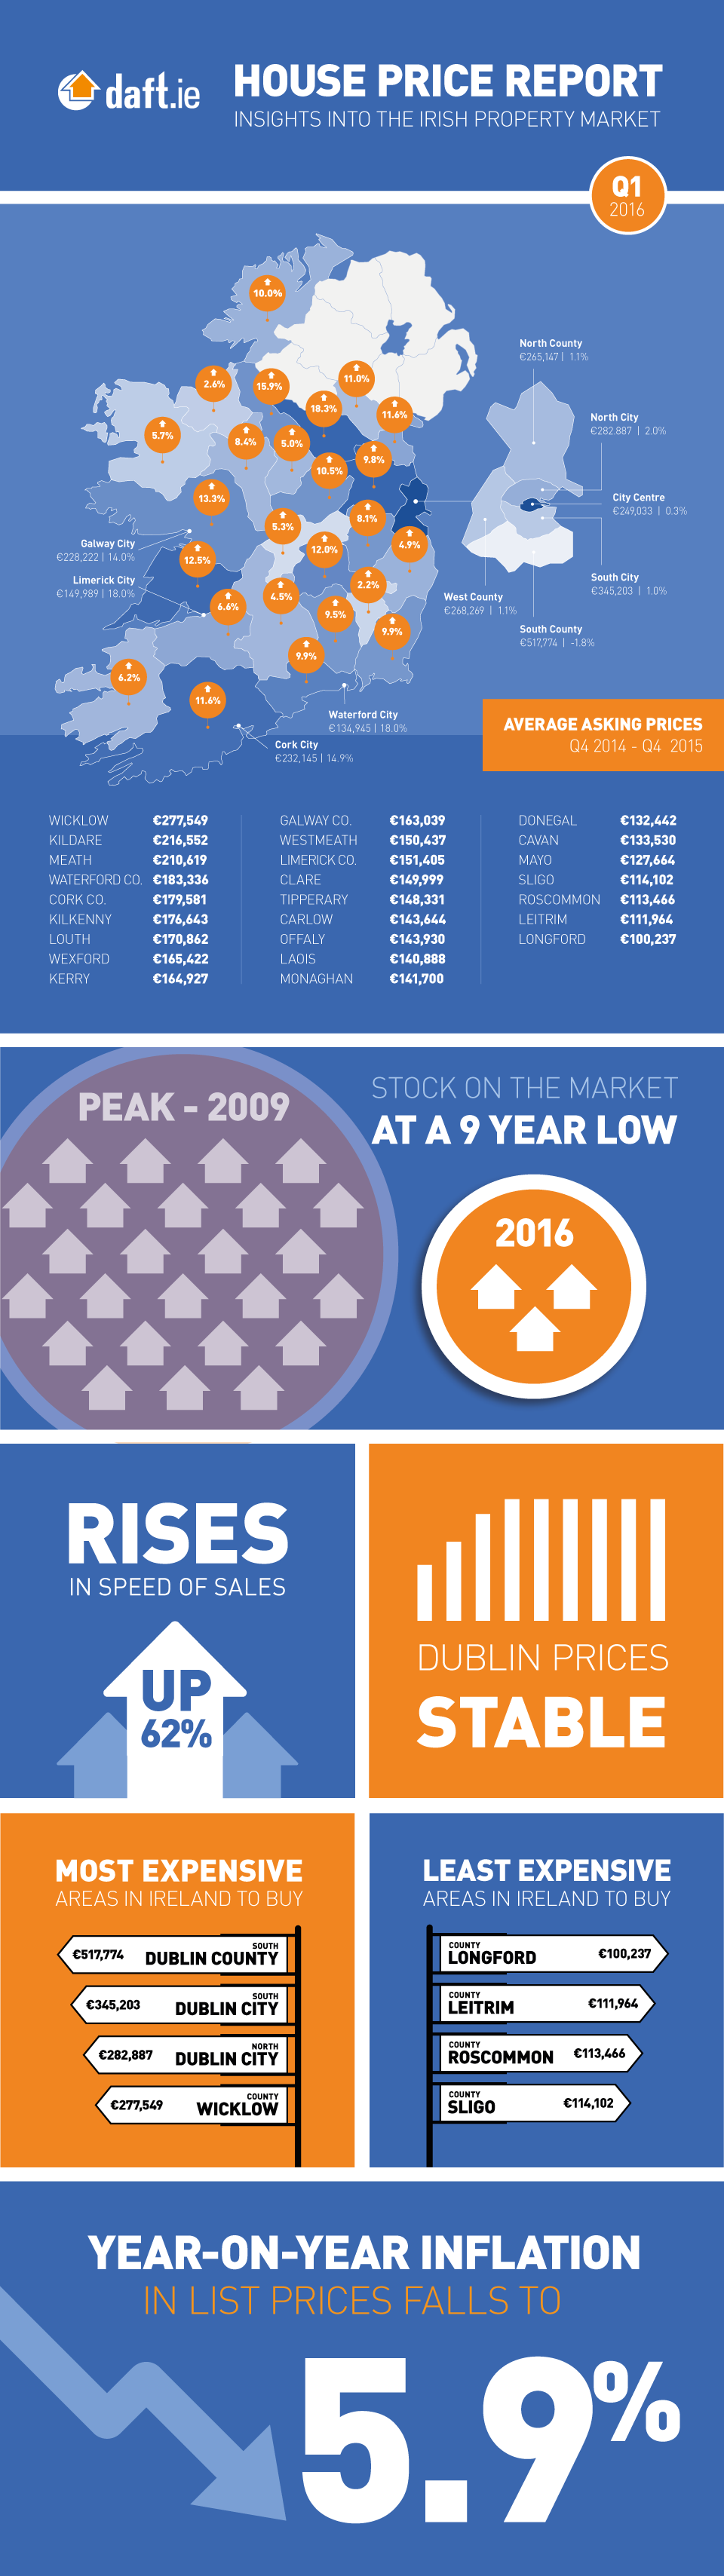 Daft.ie House Price Report: Q1 2016 Infographic